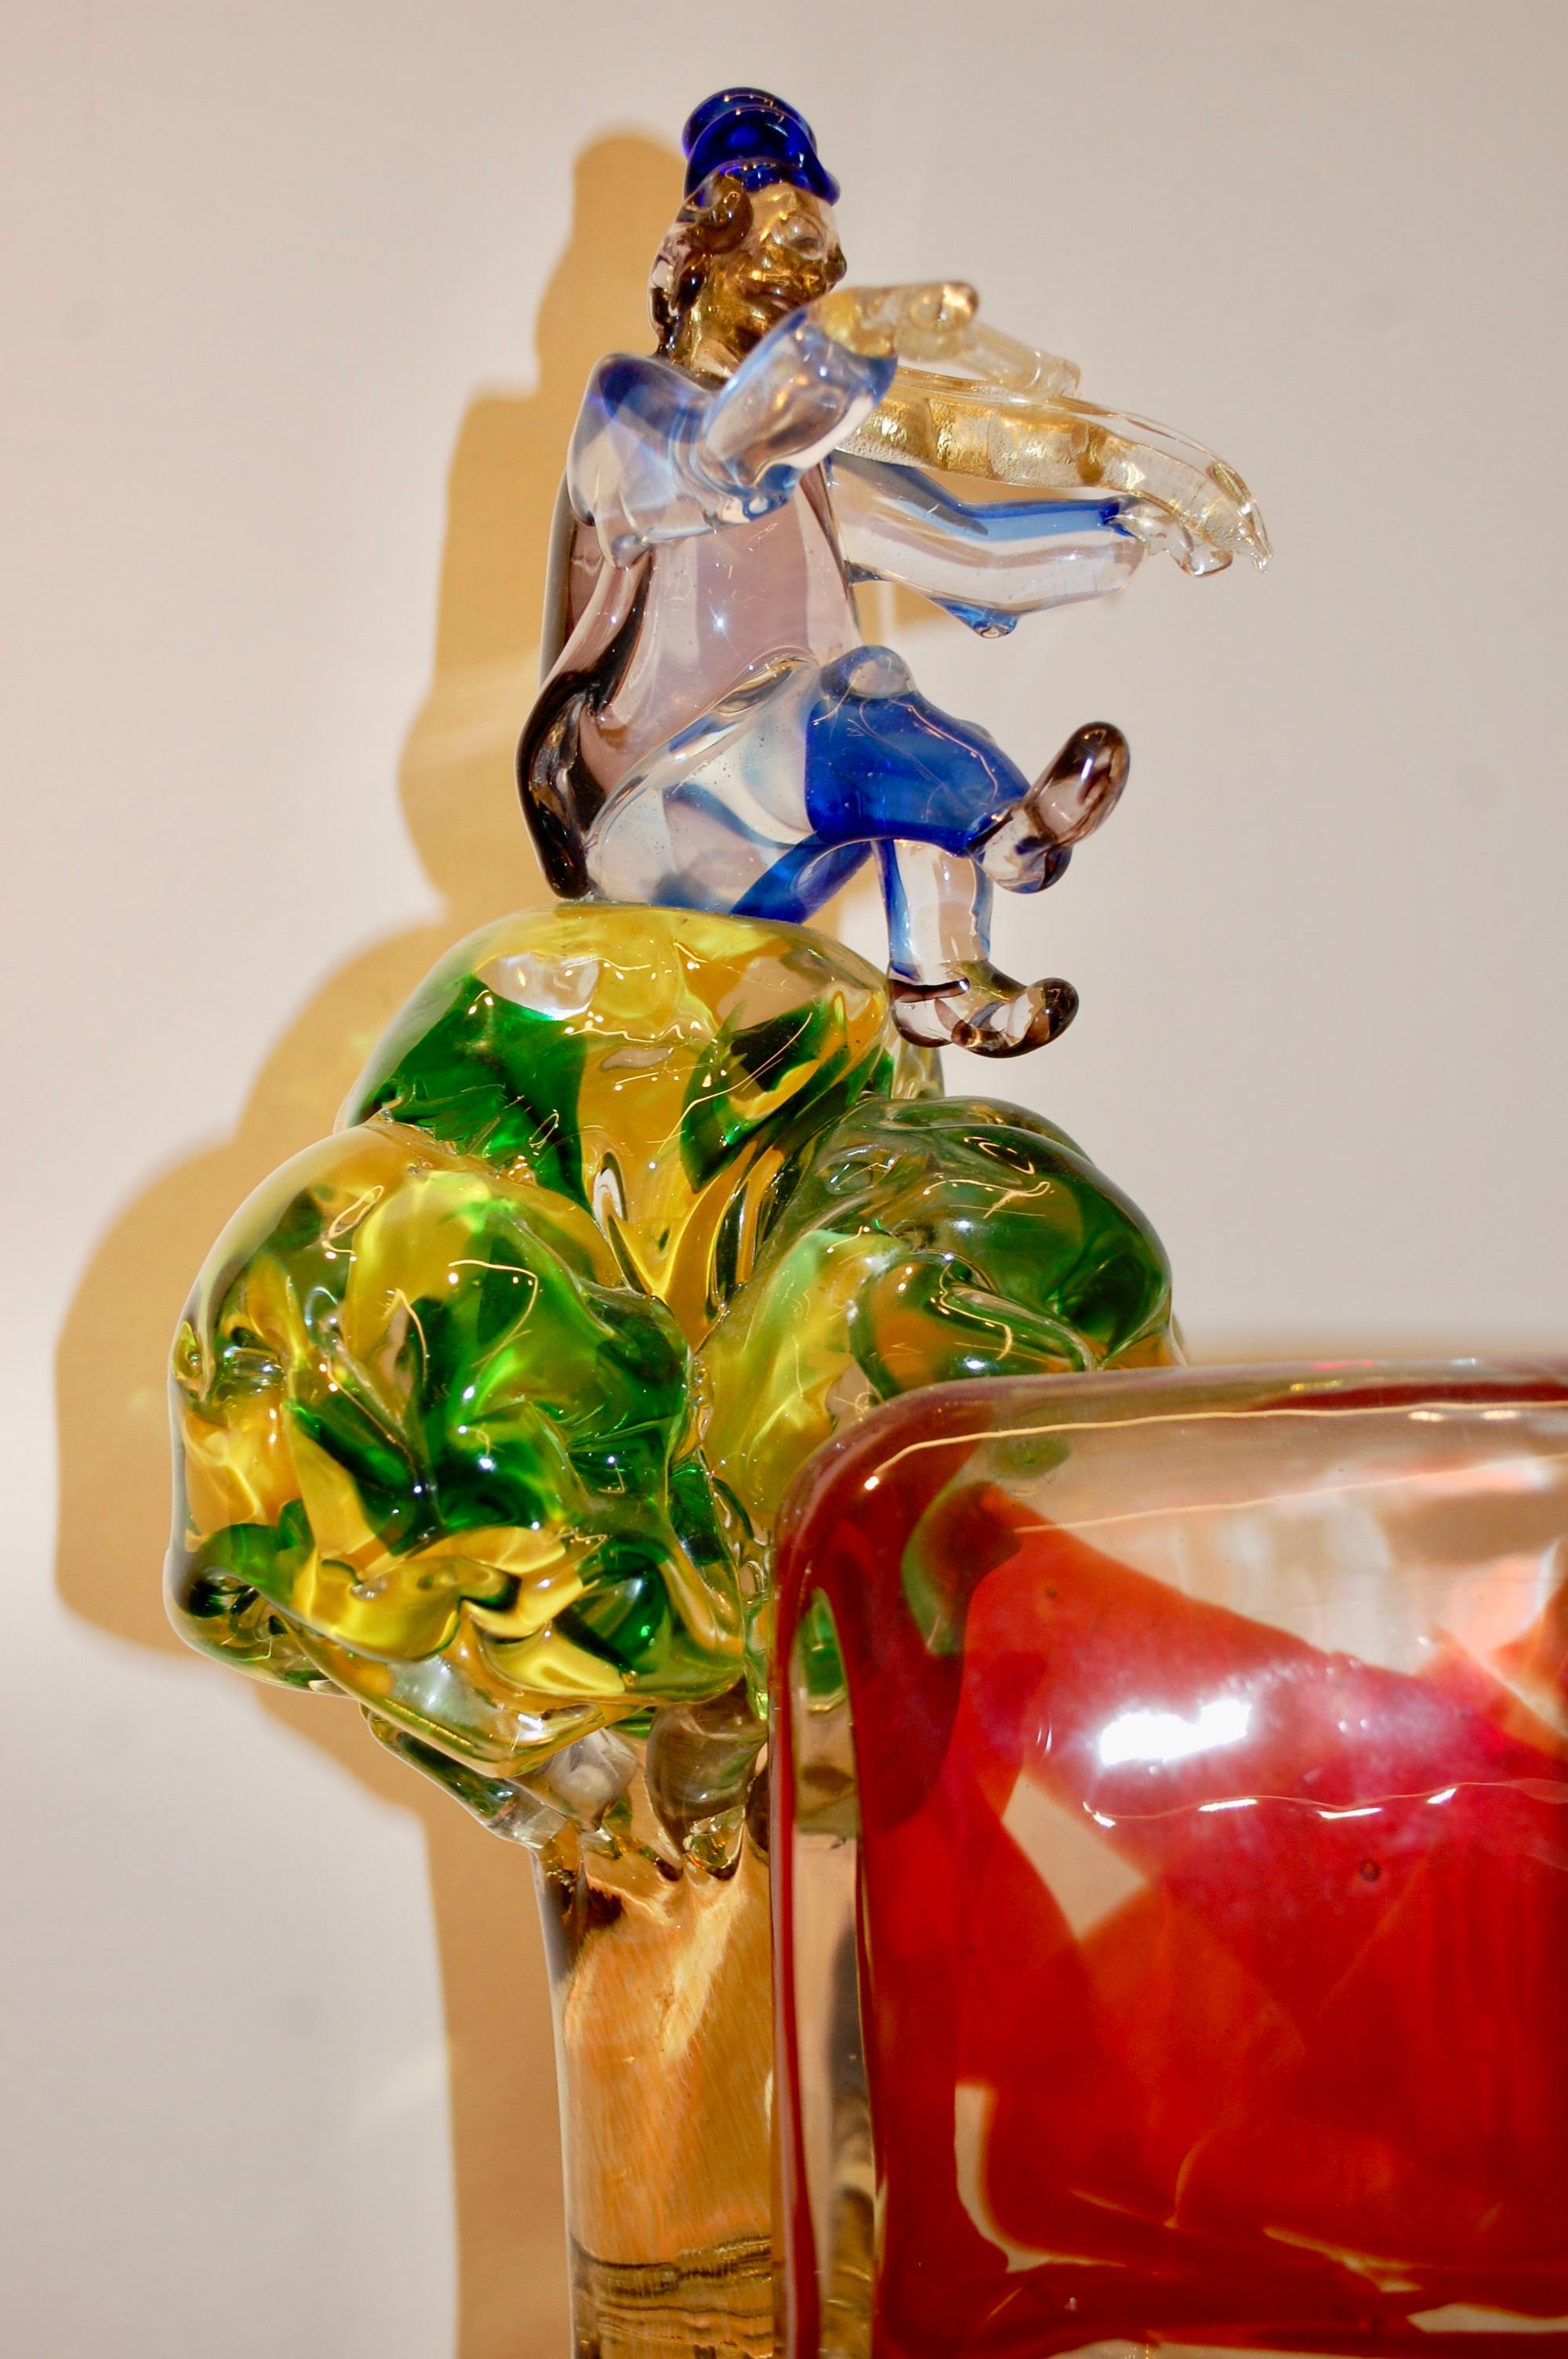 Lovers Tribute to Chagall Murano Glass Sculpture - Beige Figurative Sculpture by Walter Furlan